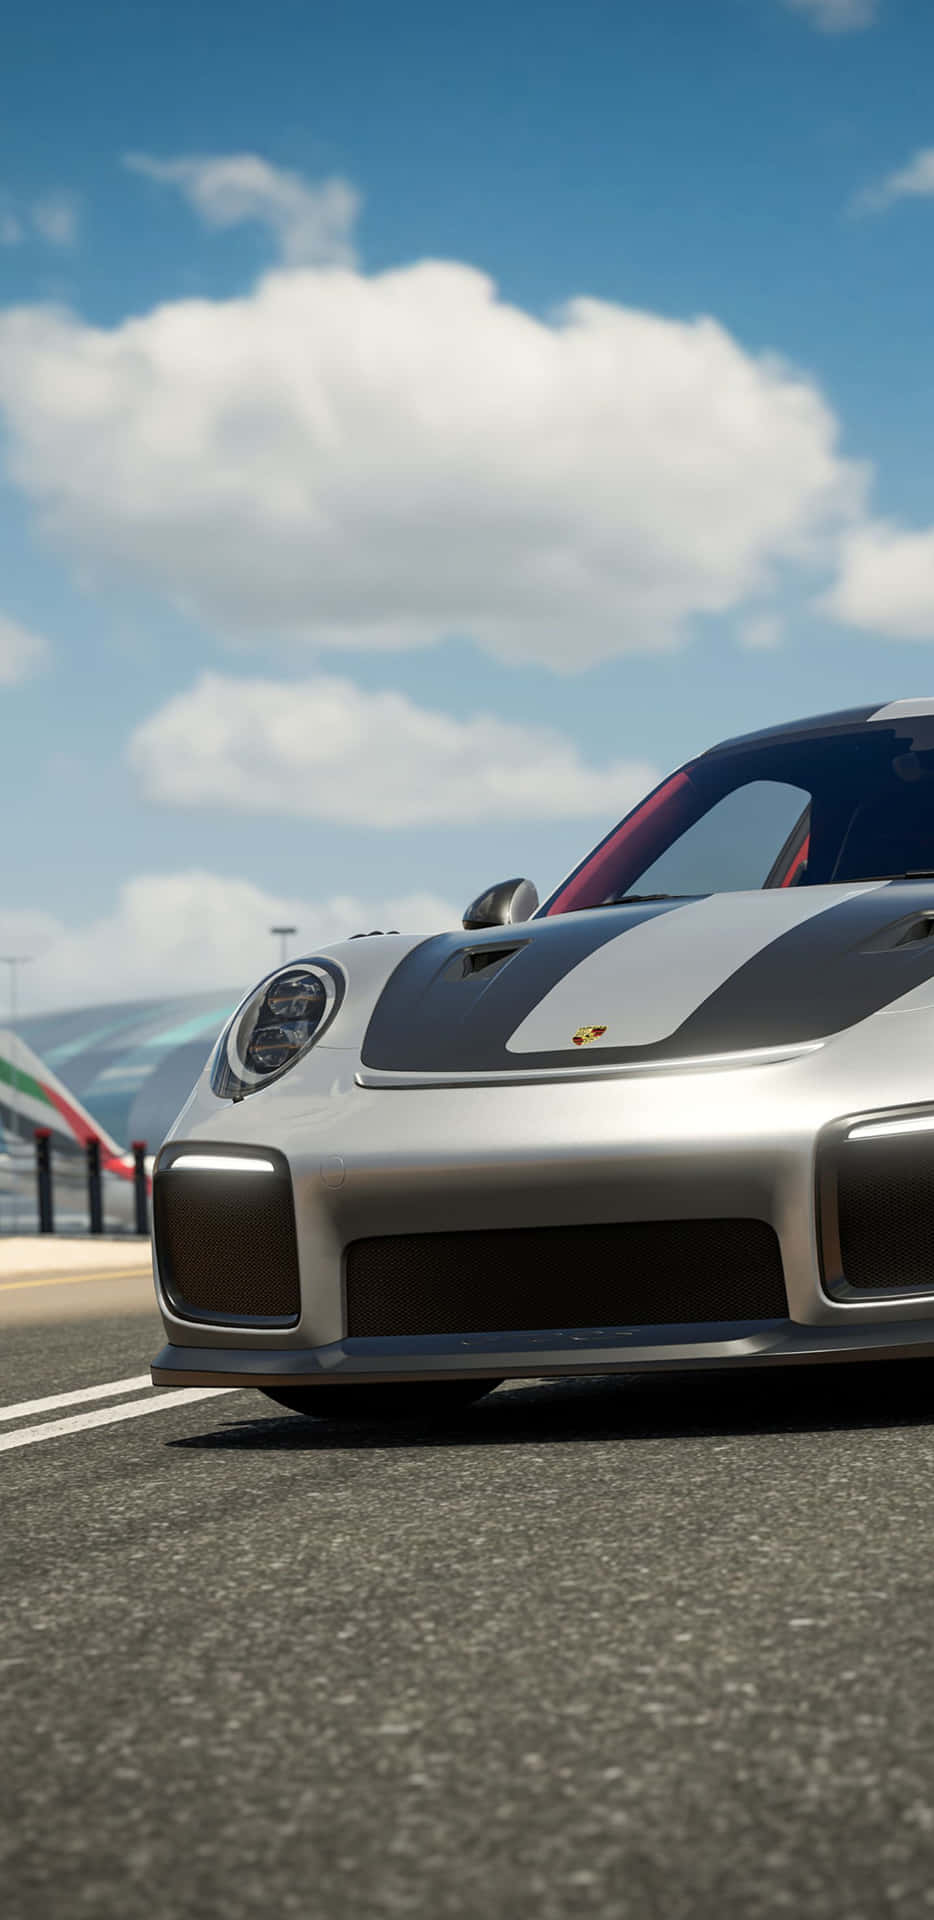 Speed, performance, and sophistication: Forza Motorsport 7 on Pixel 3XL